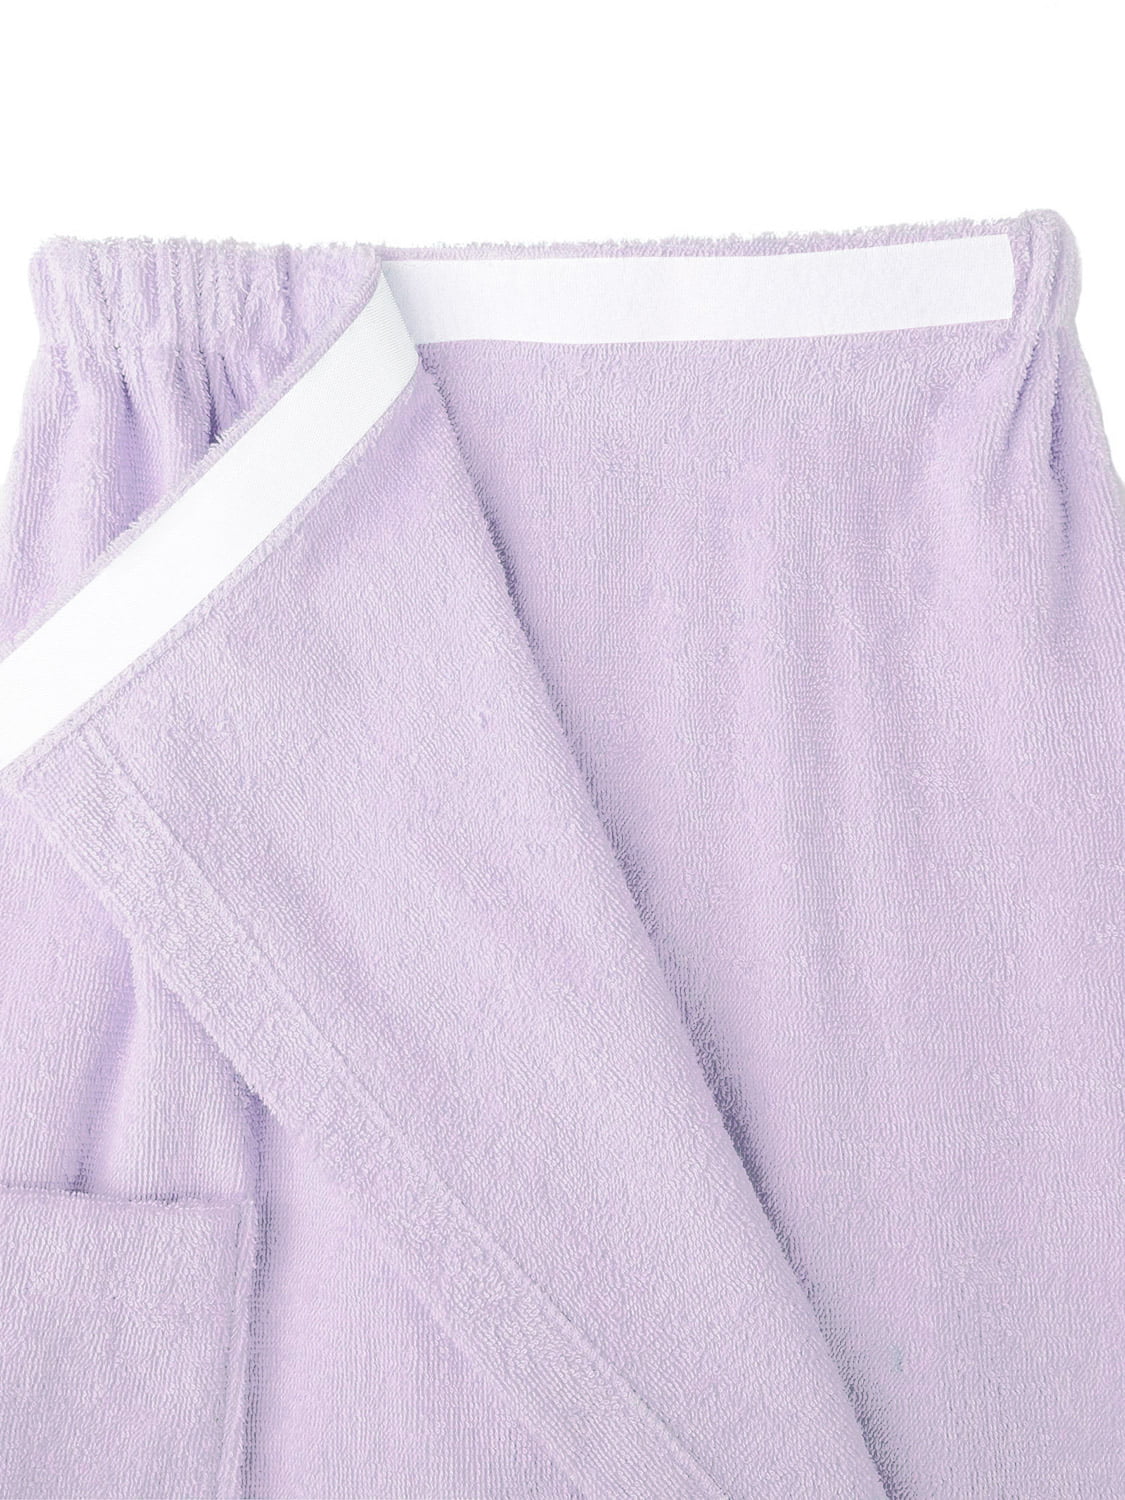 ENSŌ TOWEL Enso Towel - Wrap Yourself up in a Silky Soft, Bamboo Towel